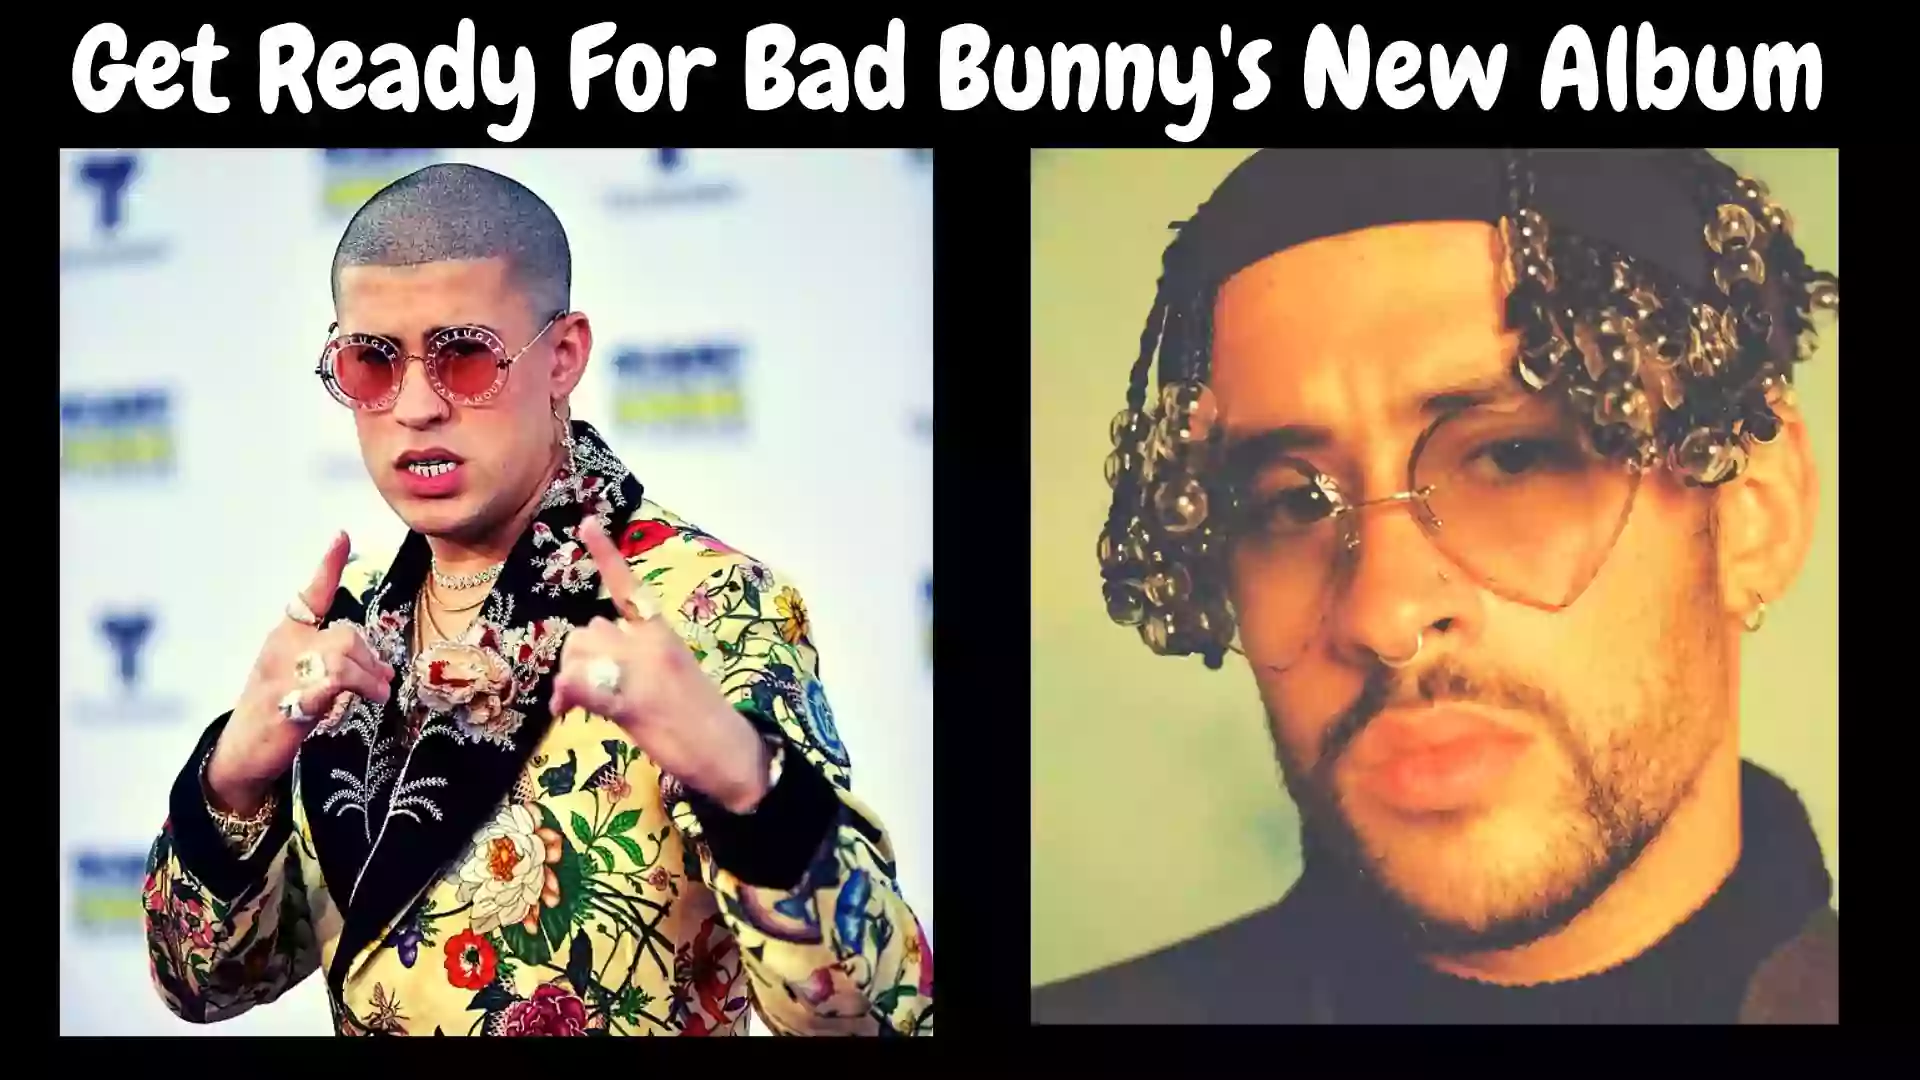 Get Ready For Bad Bunny New Album in 2022